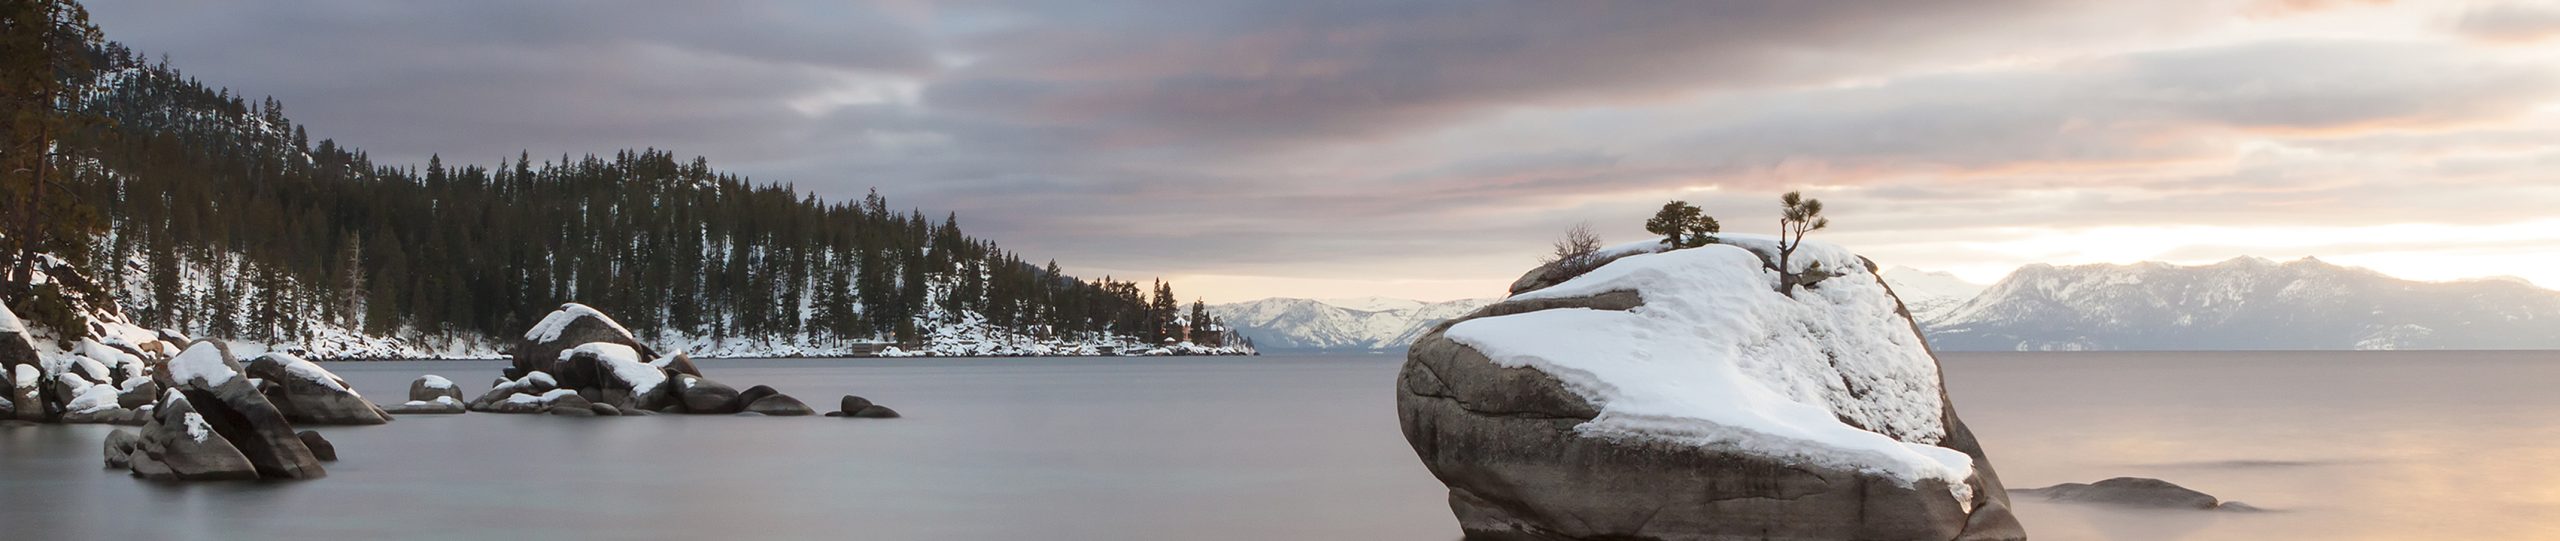 Pleasant Lake Tahoe weather with snowy boulders on lake at sunset